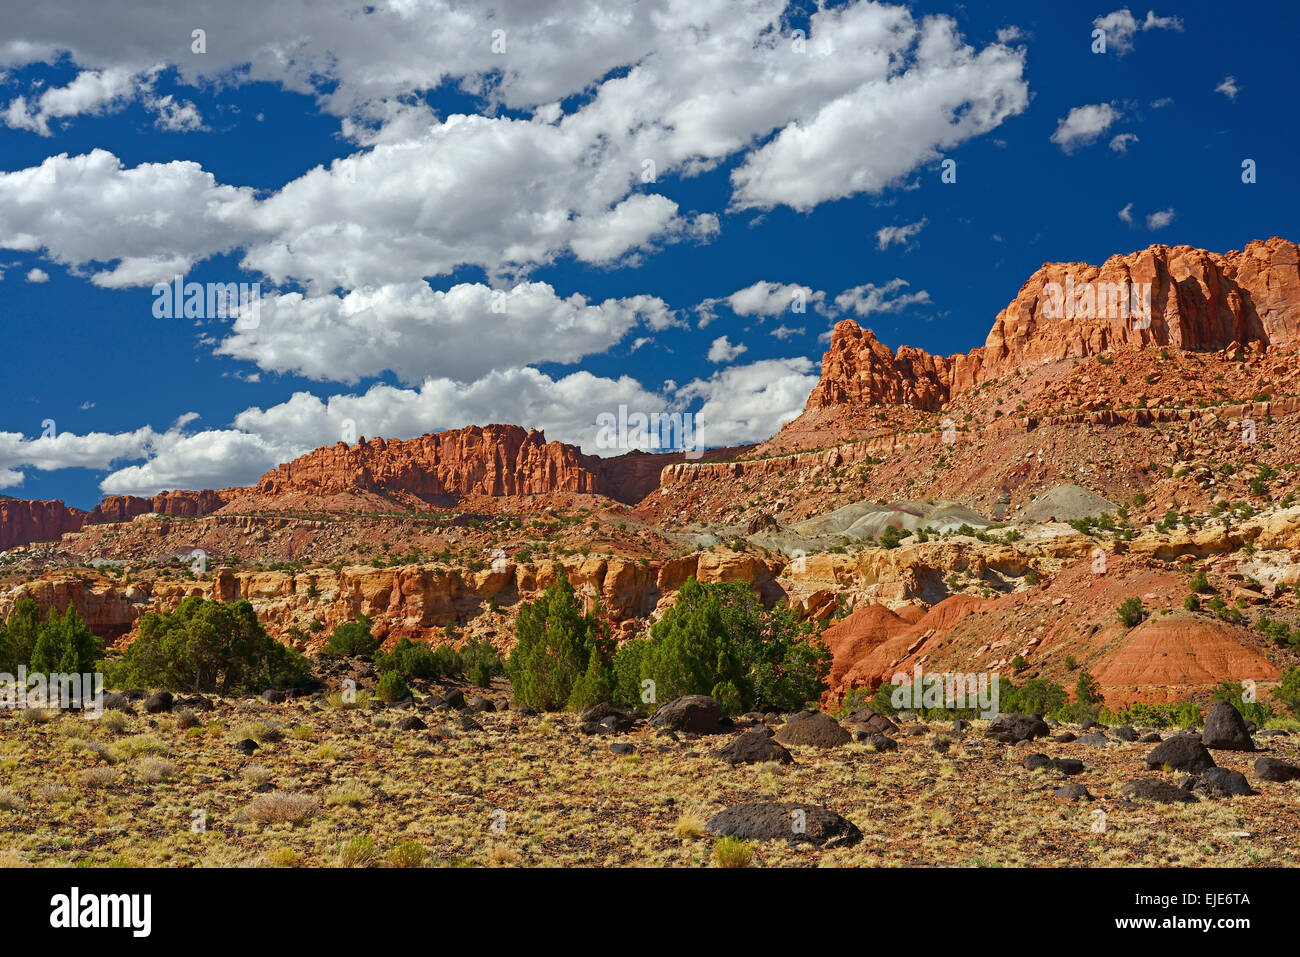 Combination of red rock and volcanic stone near Capital Reef National Park, Utah, United States. Stock Photo